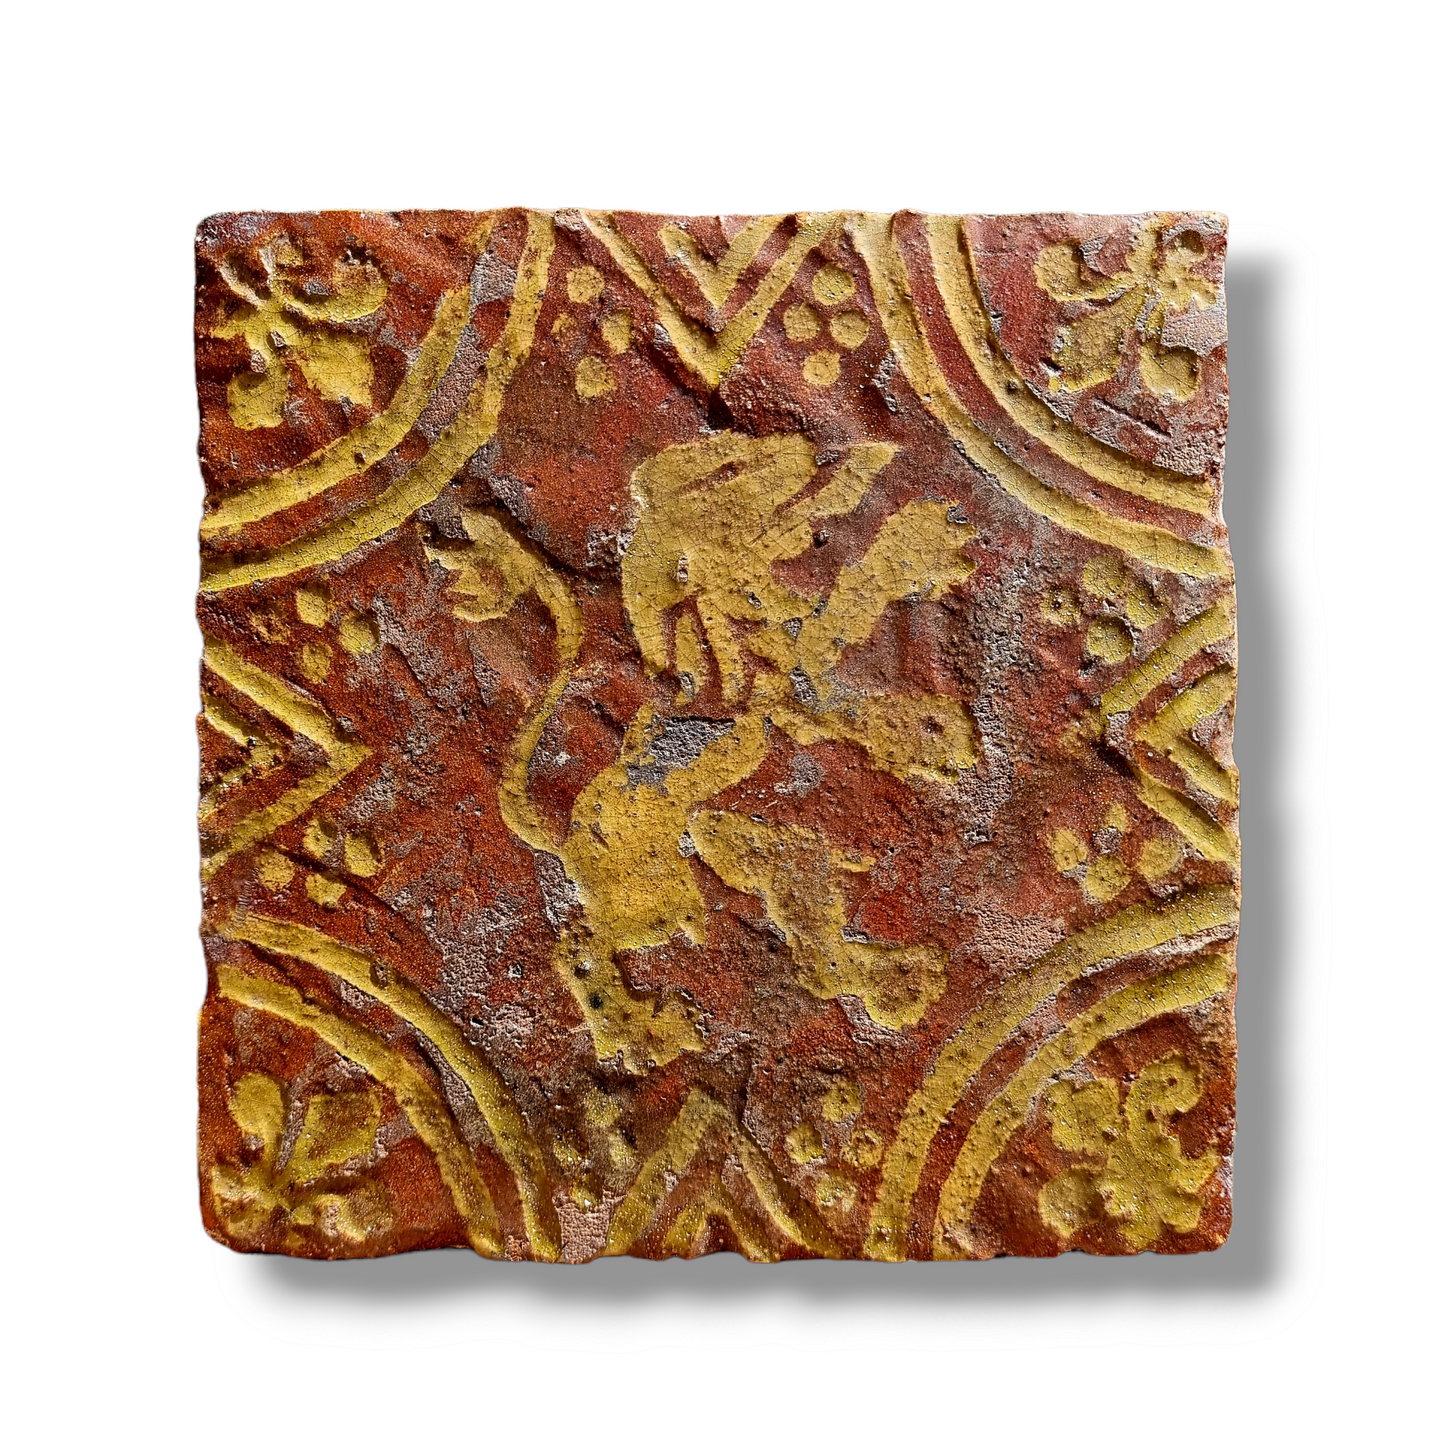 Medieval Style, 19th Century-Made, Antique Encaustic Floor Tile With Rampant Lion